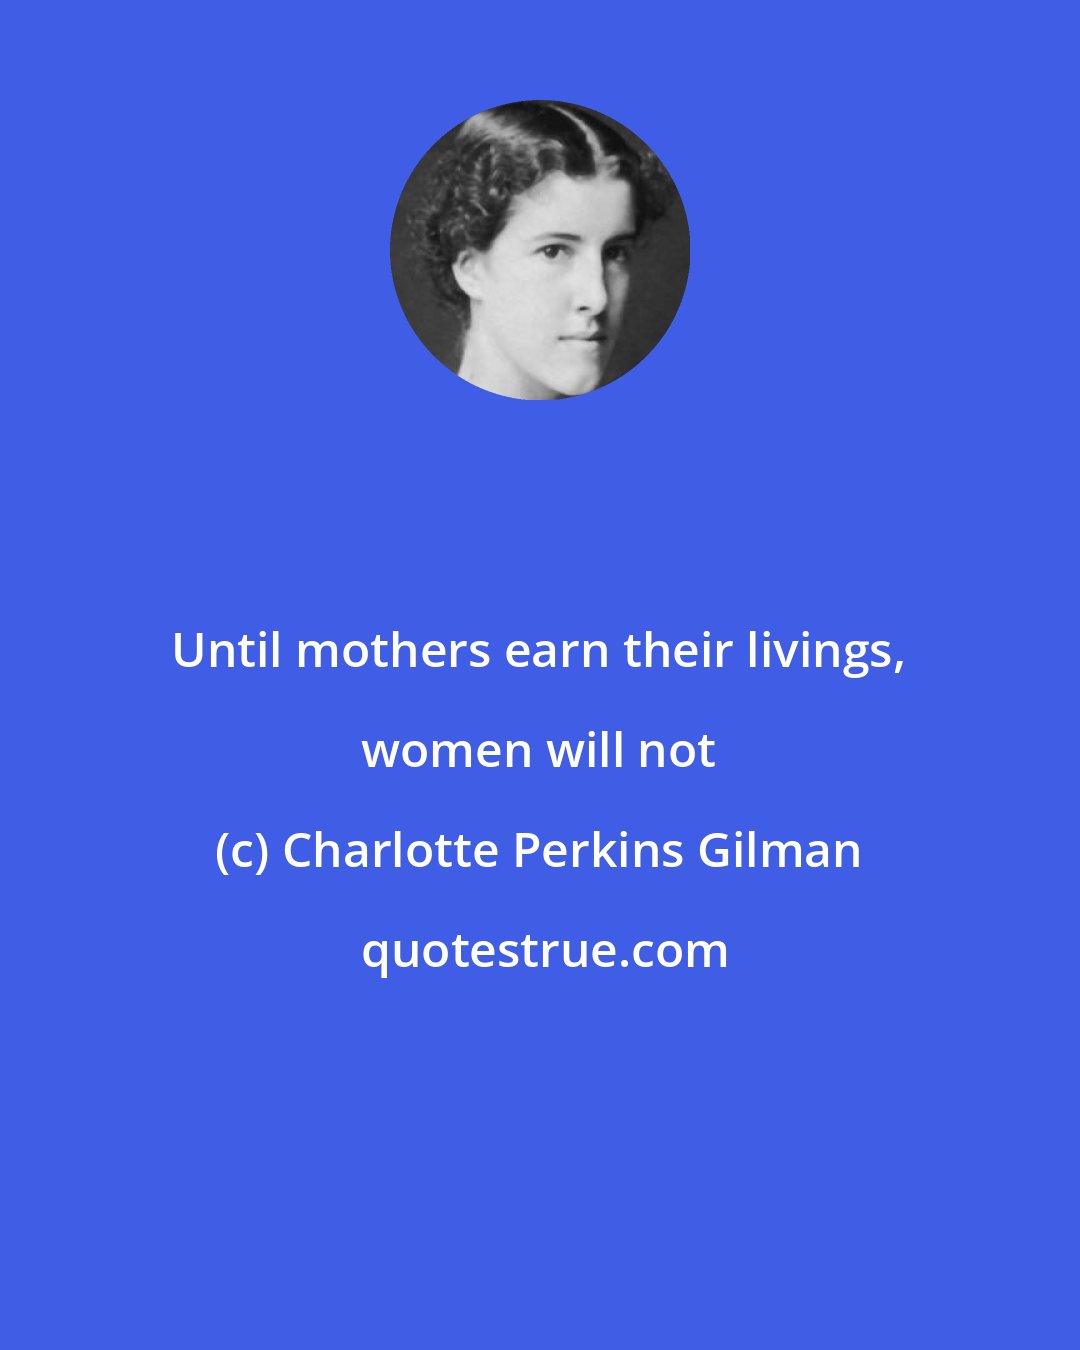 Charlotte Perkins Gilman: Until mothers earn their livings, women will not